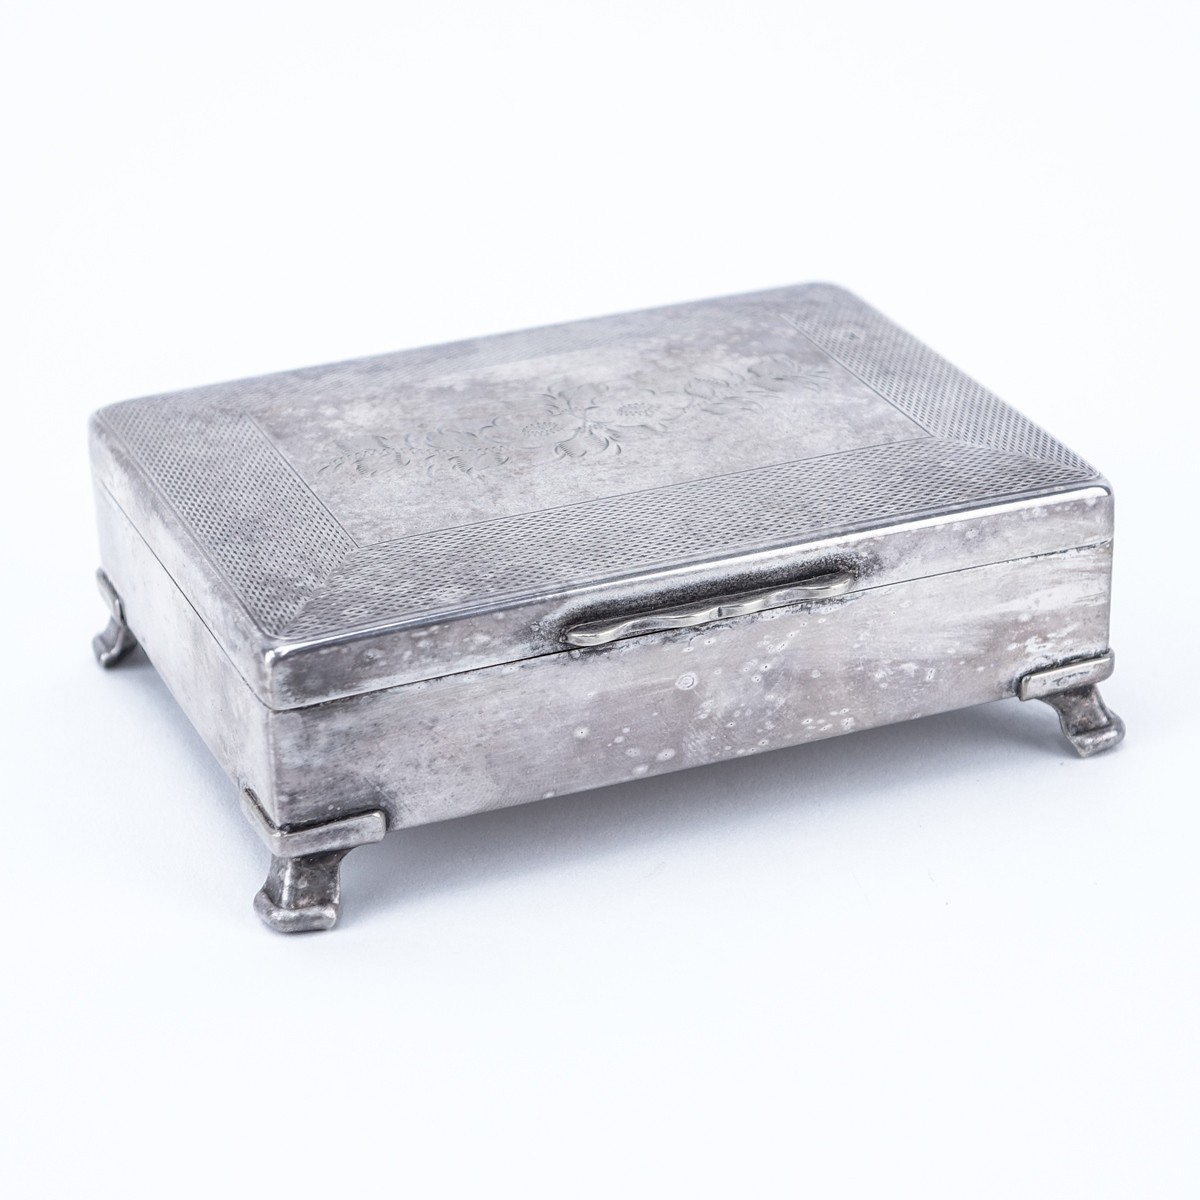 Aristocrat Silver Plated Wood Lined Cigarette Box